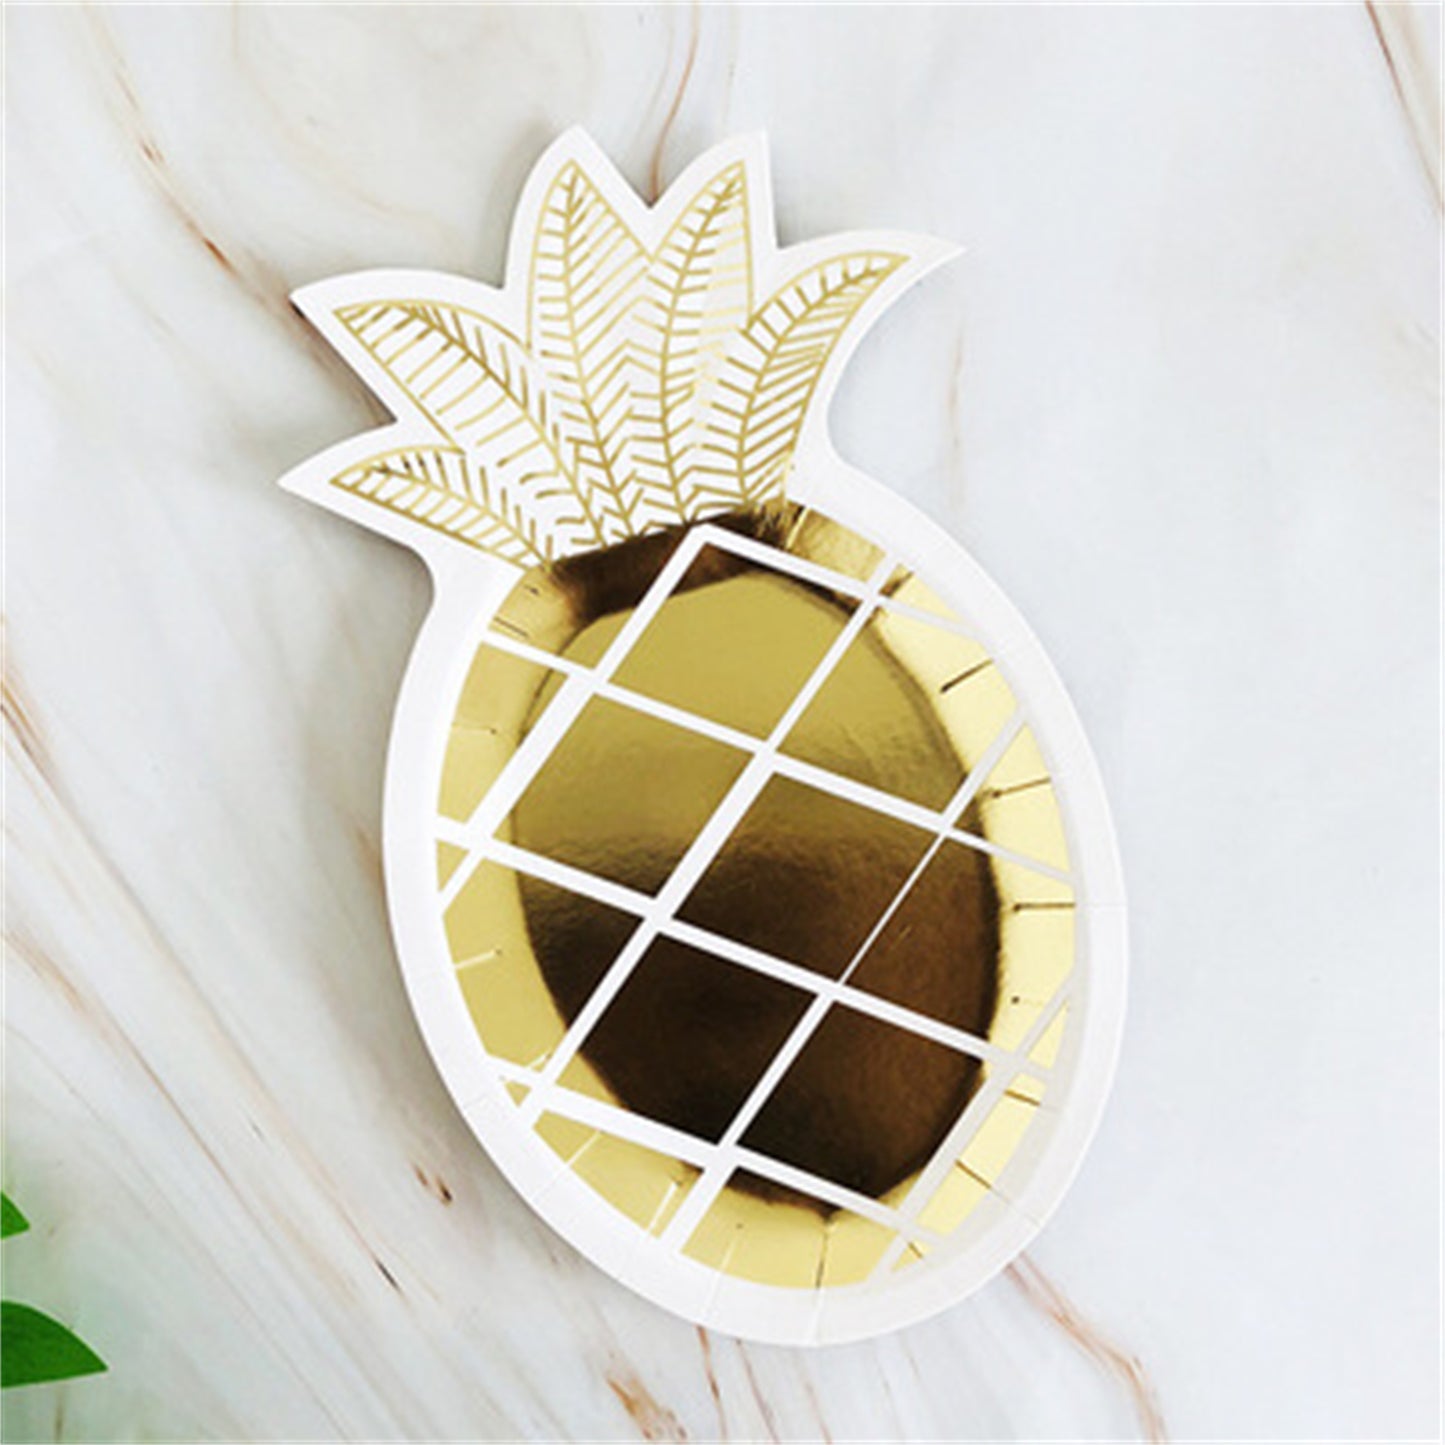 Hot gilded pineapple disposable fruit paper plate